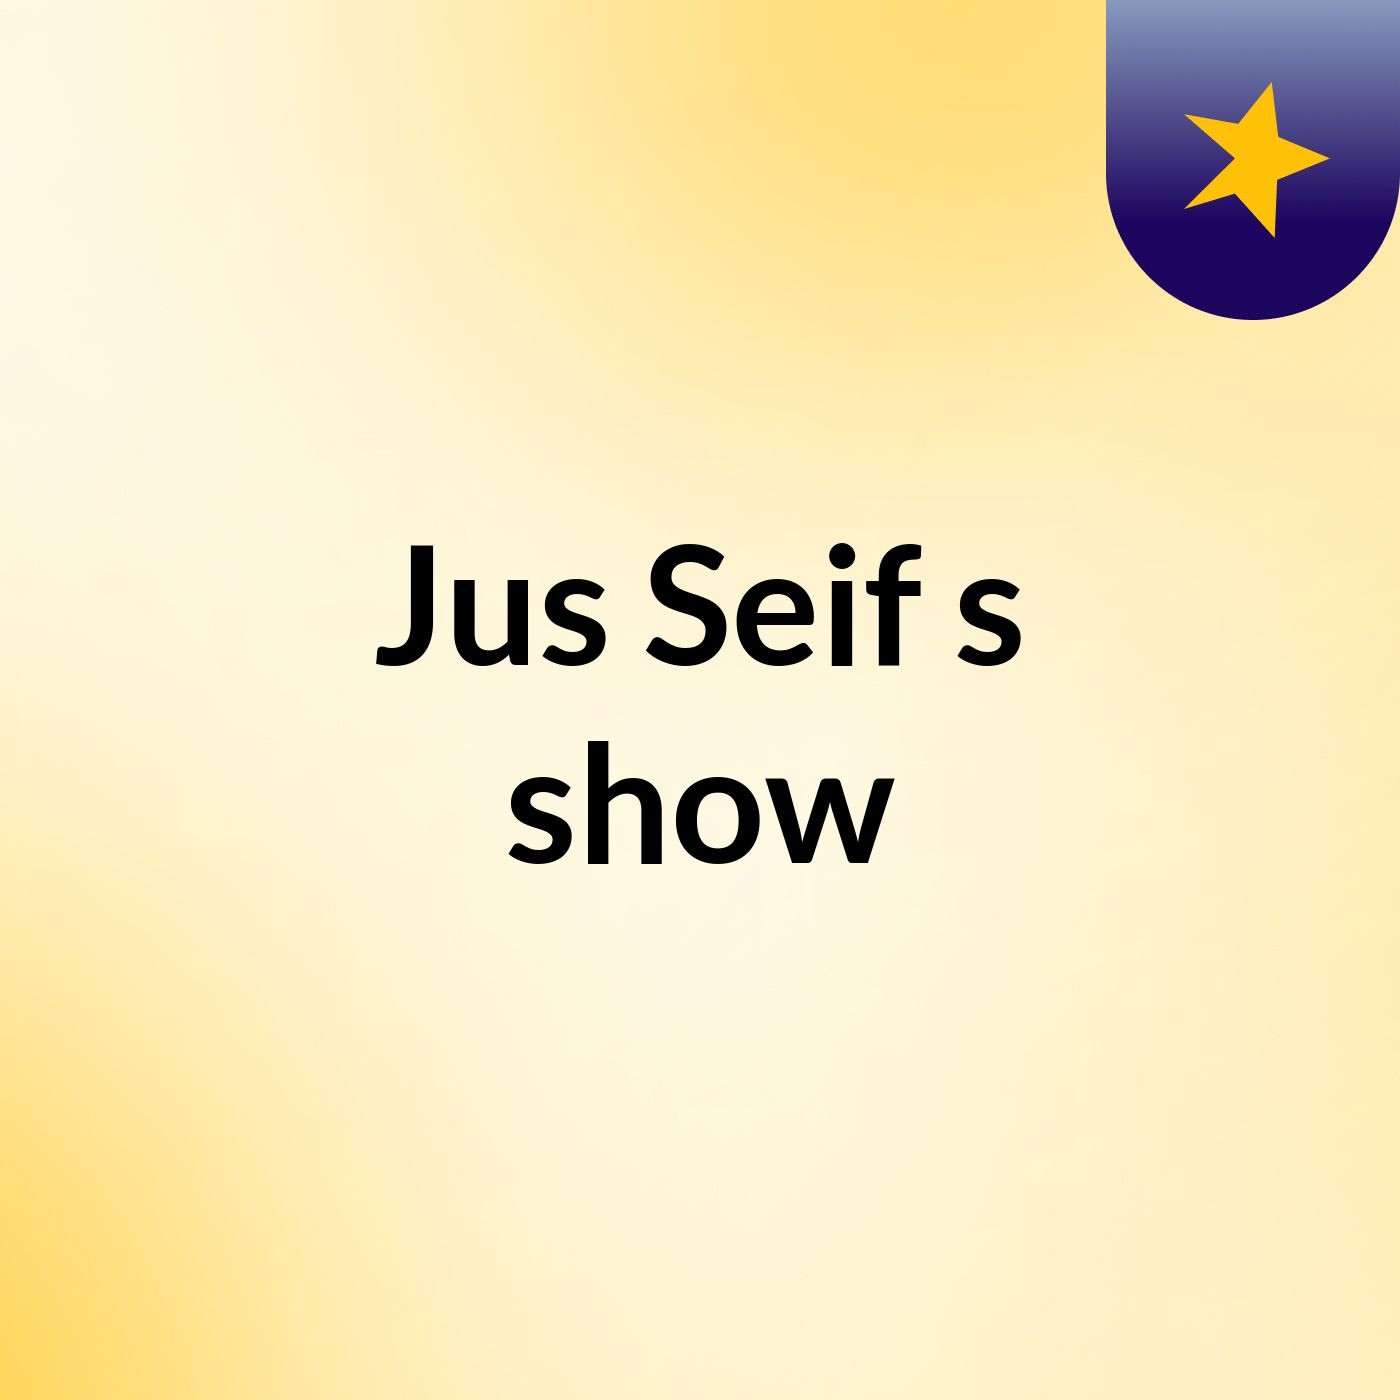 Jus Seif's show